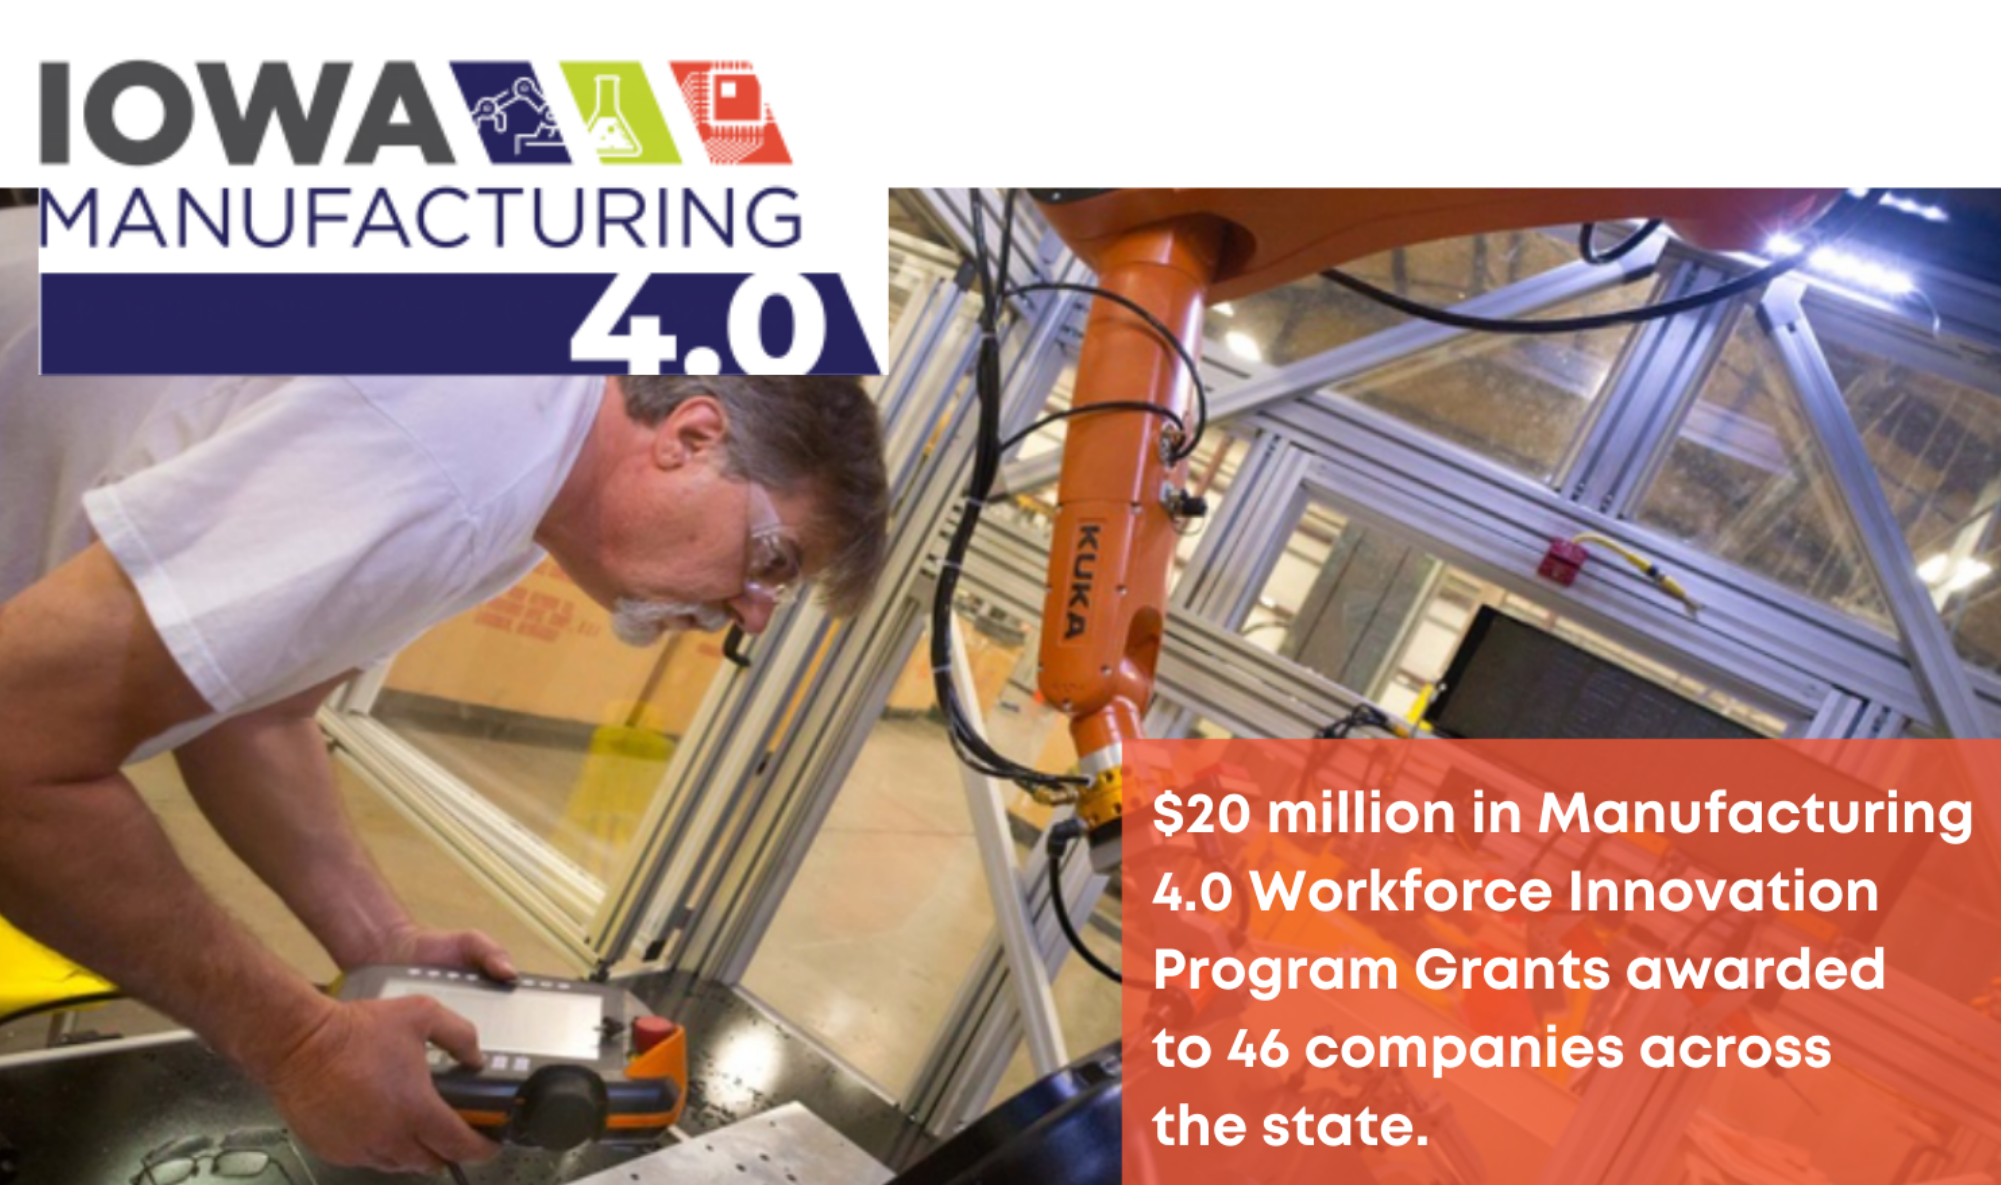 Iowa Manufacturing 4.0 $20 million in manufacturing 4.0 Workforce innovation program grants awarded to 46 companies across the state